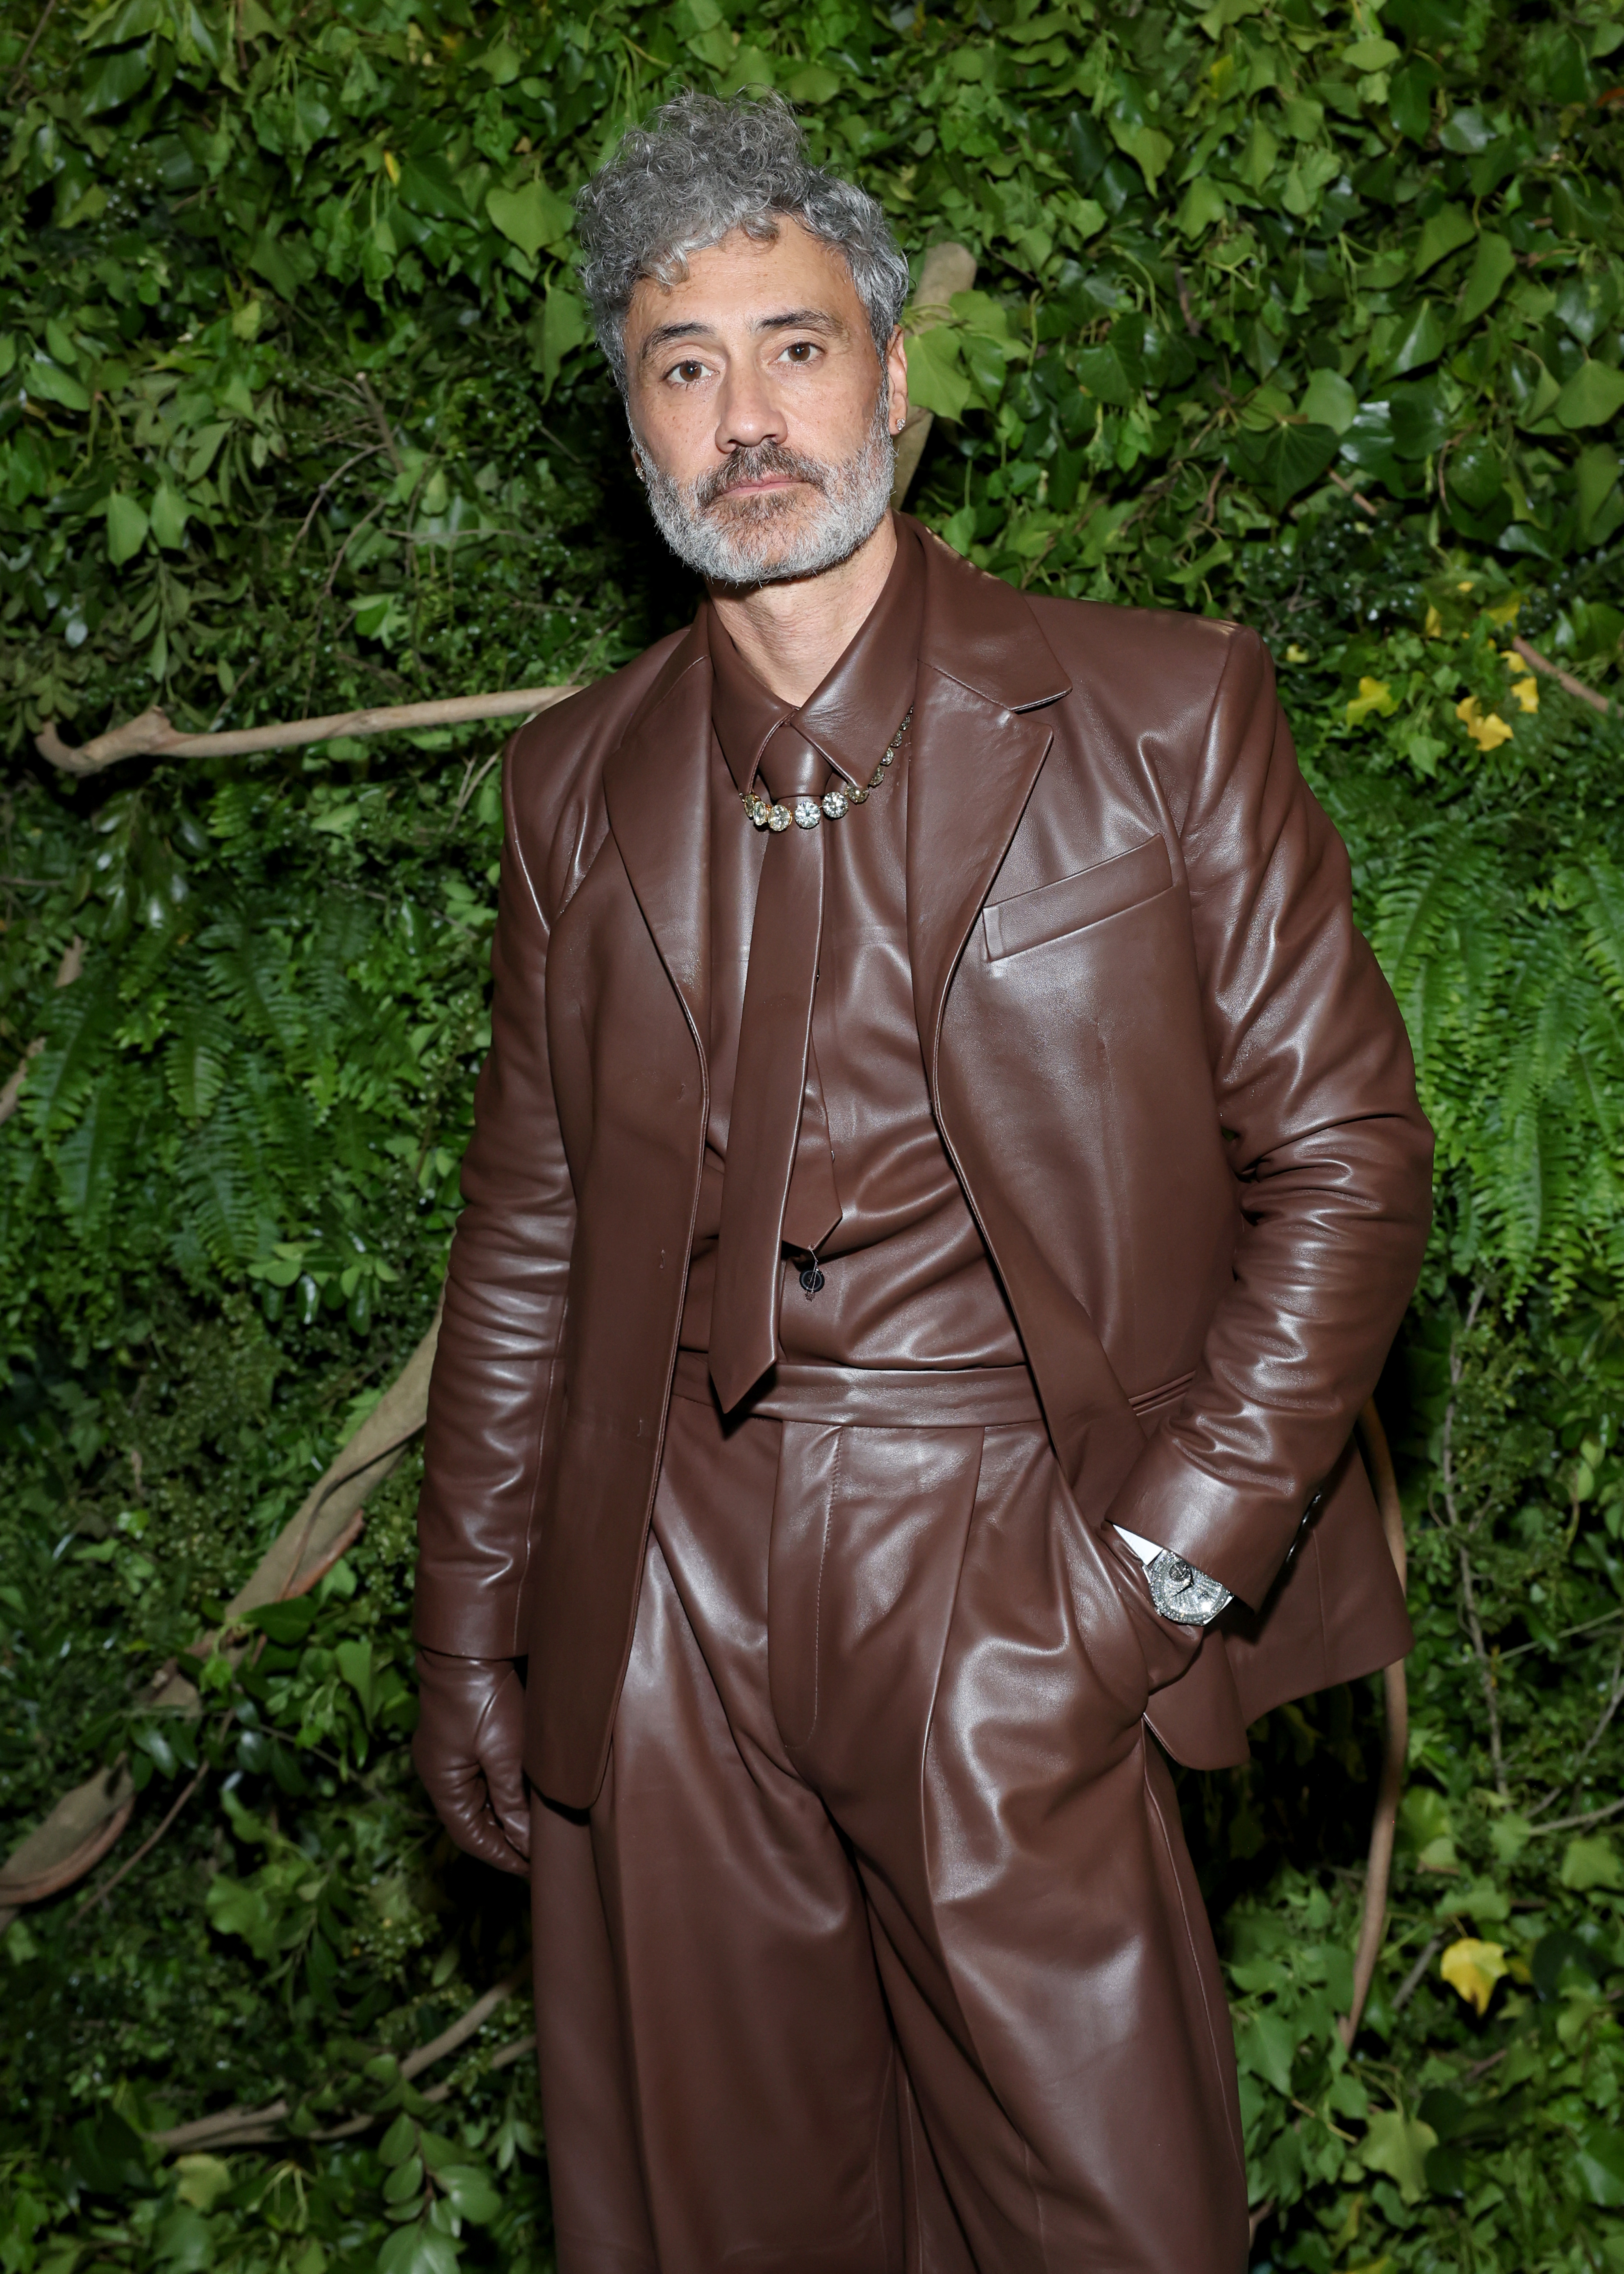 Taika Waititi in a stylish leather outfit with a statement necklace poses against a leafy backdrop